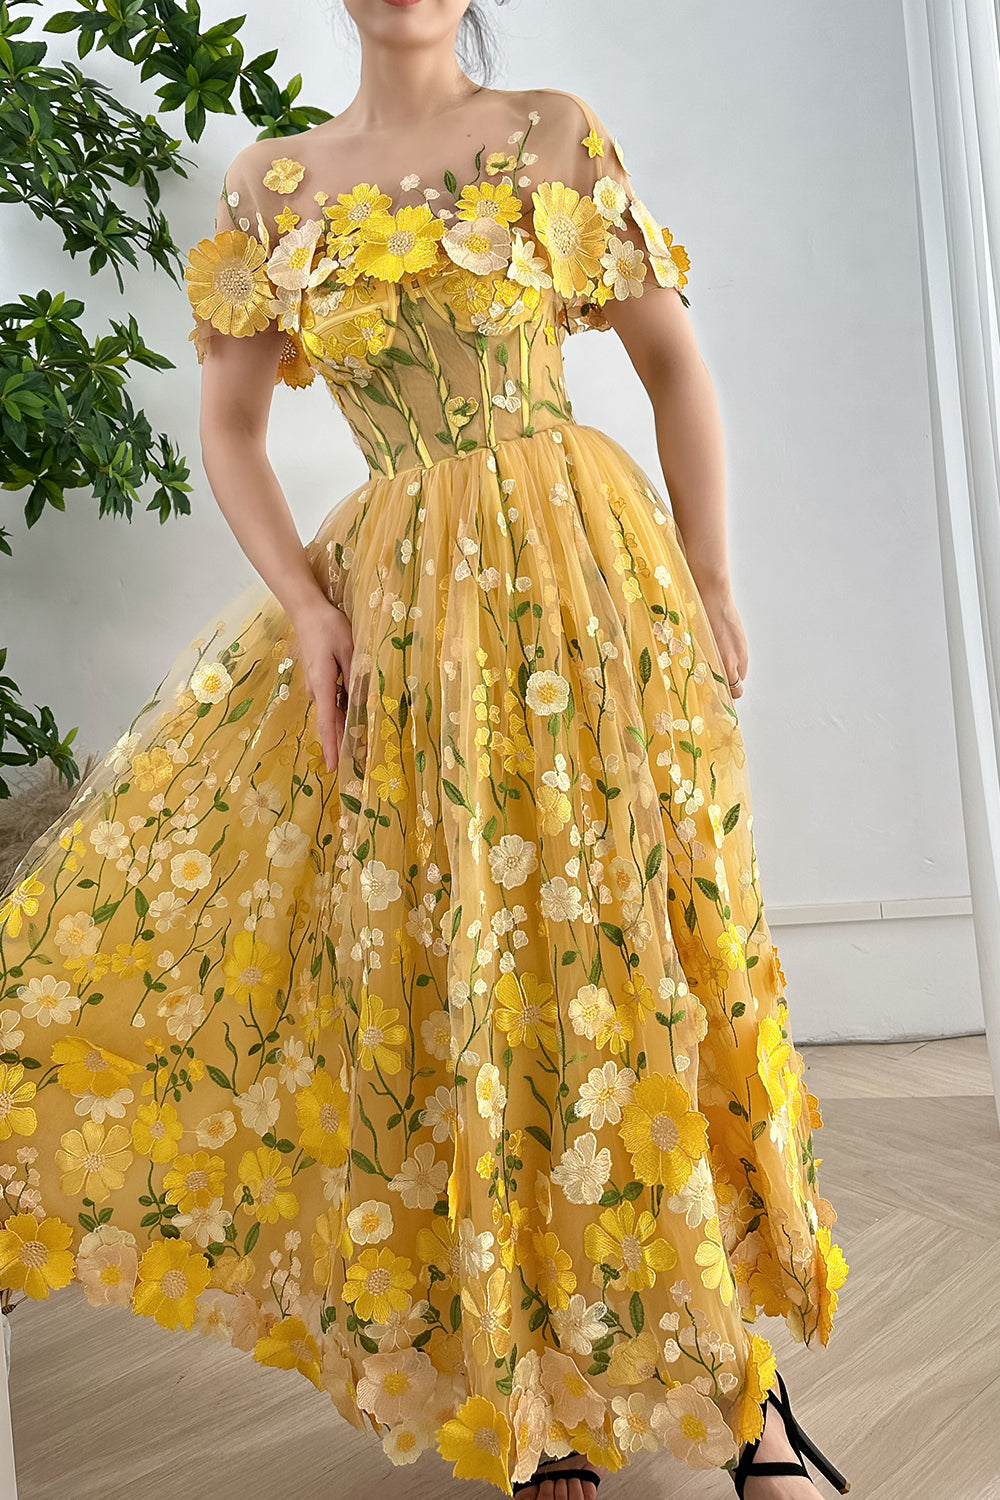 Strapless Floral Corset Yellow Dress with Removable Cape